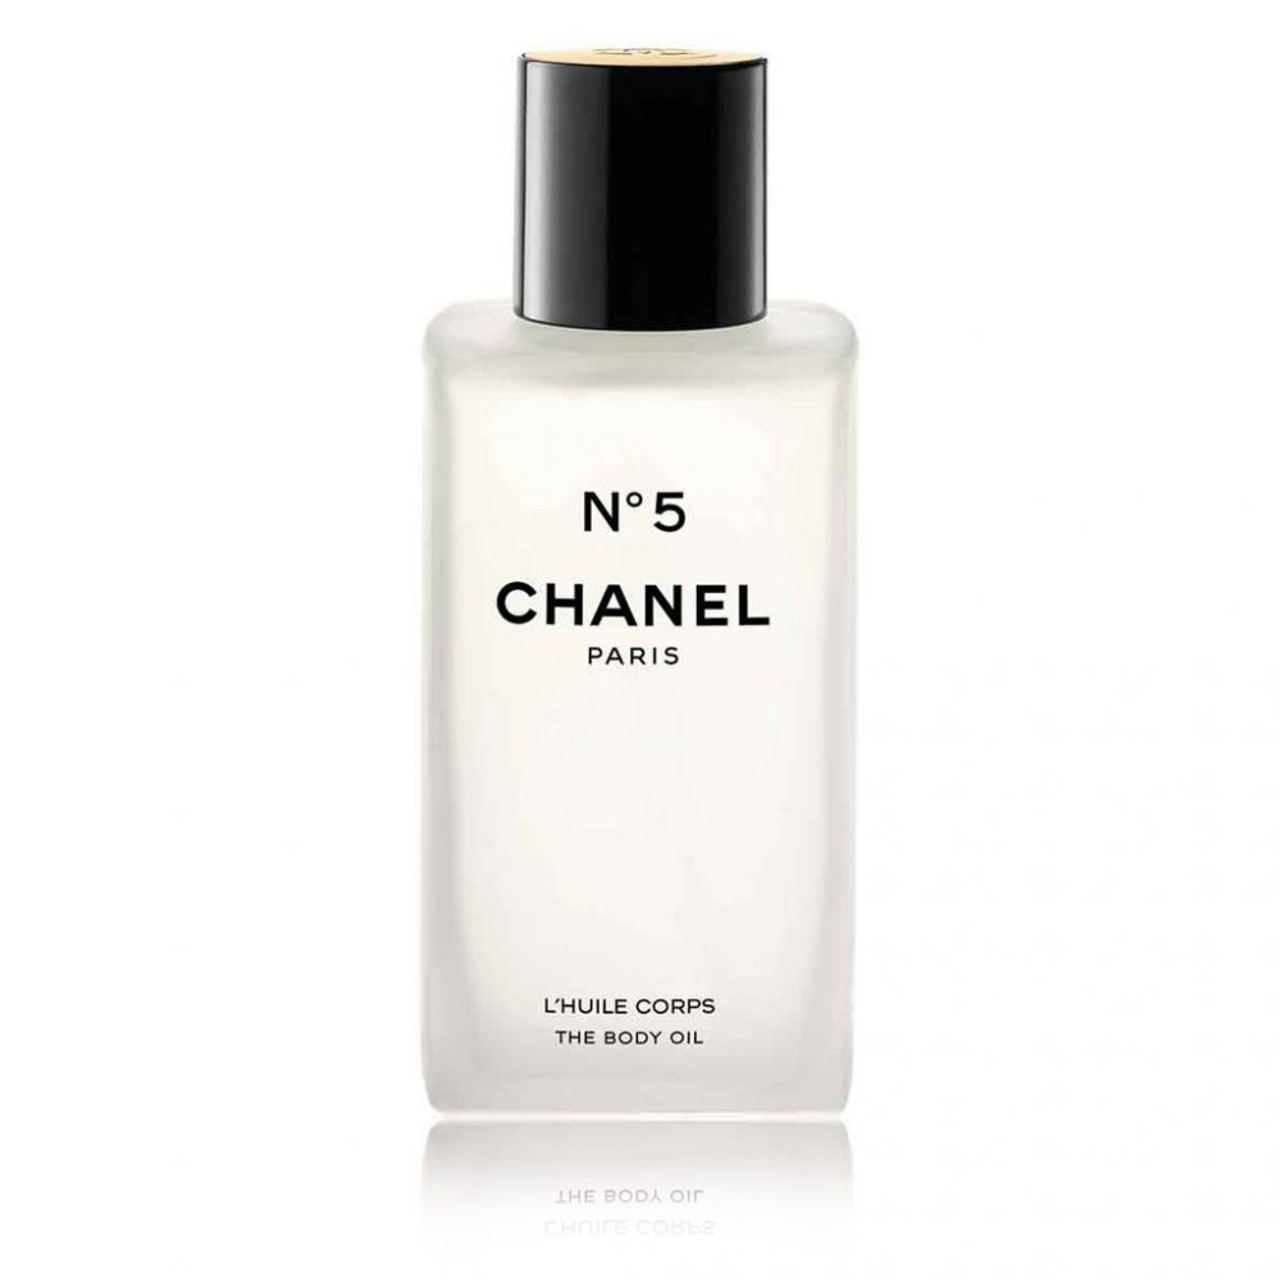 Chanel #5 Body Oil | Scented Fragrance & Perfume Oils